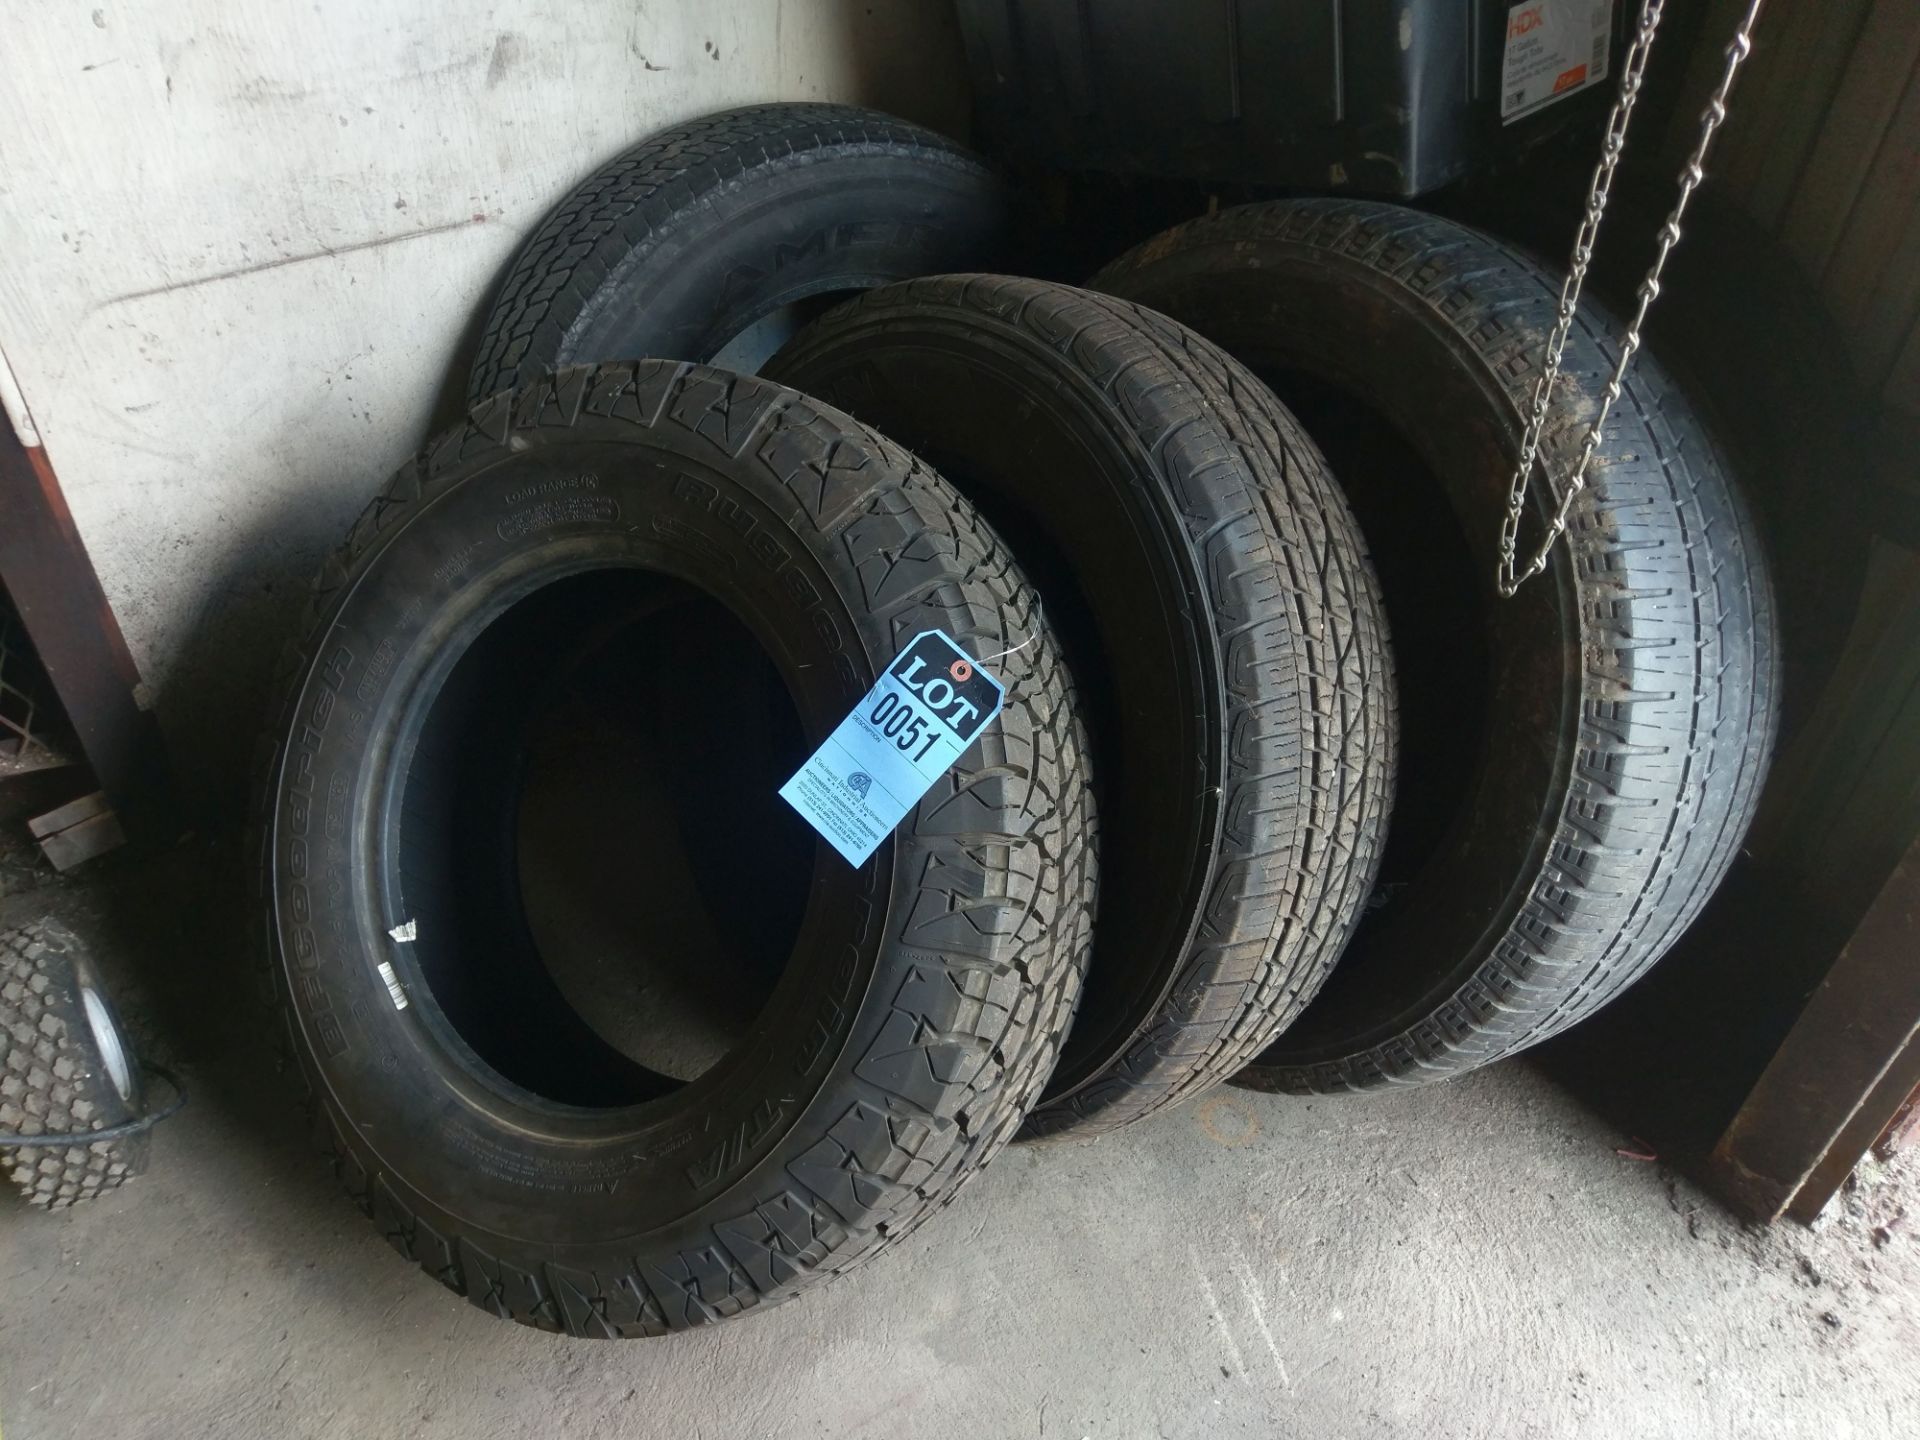 (5) TIRES - (4) USED AND (1) NEW - 16" AND 17"